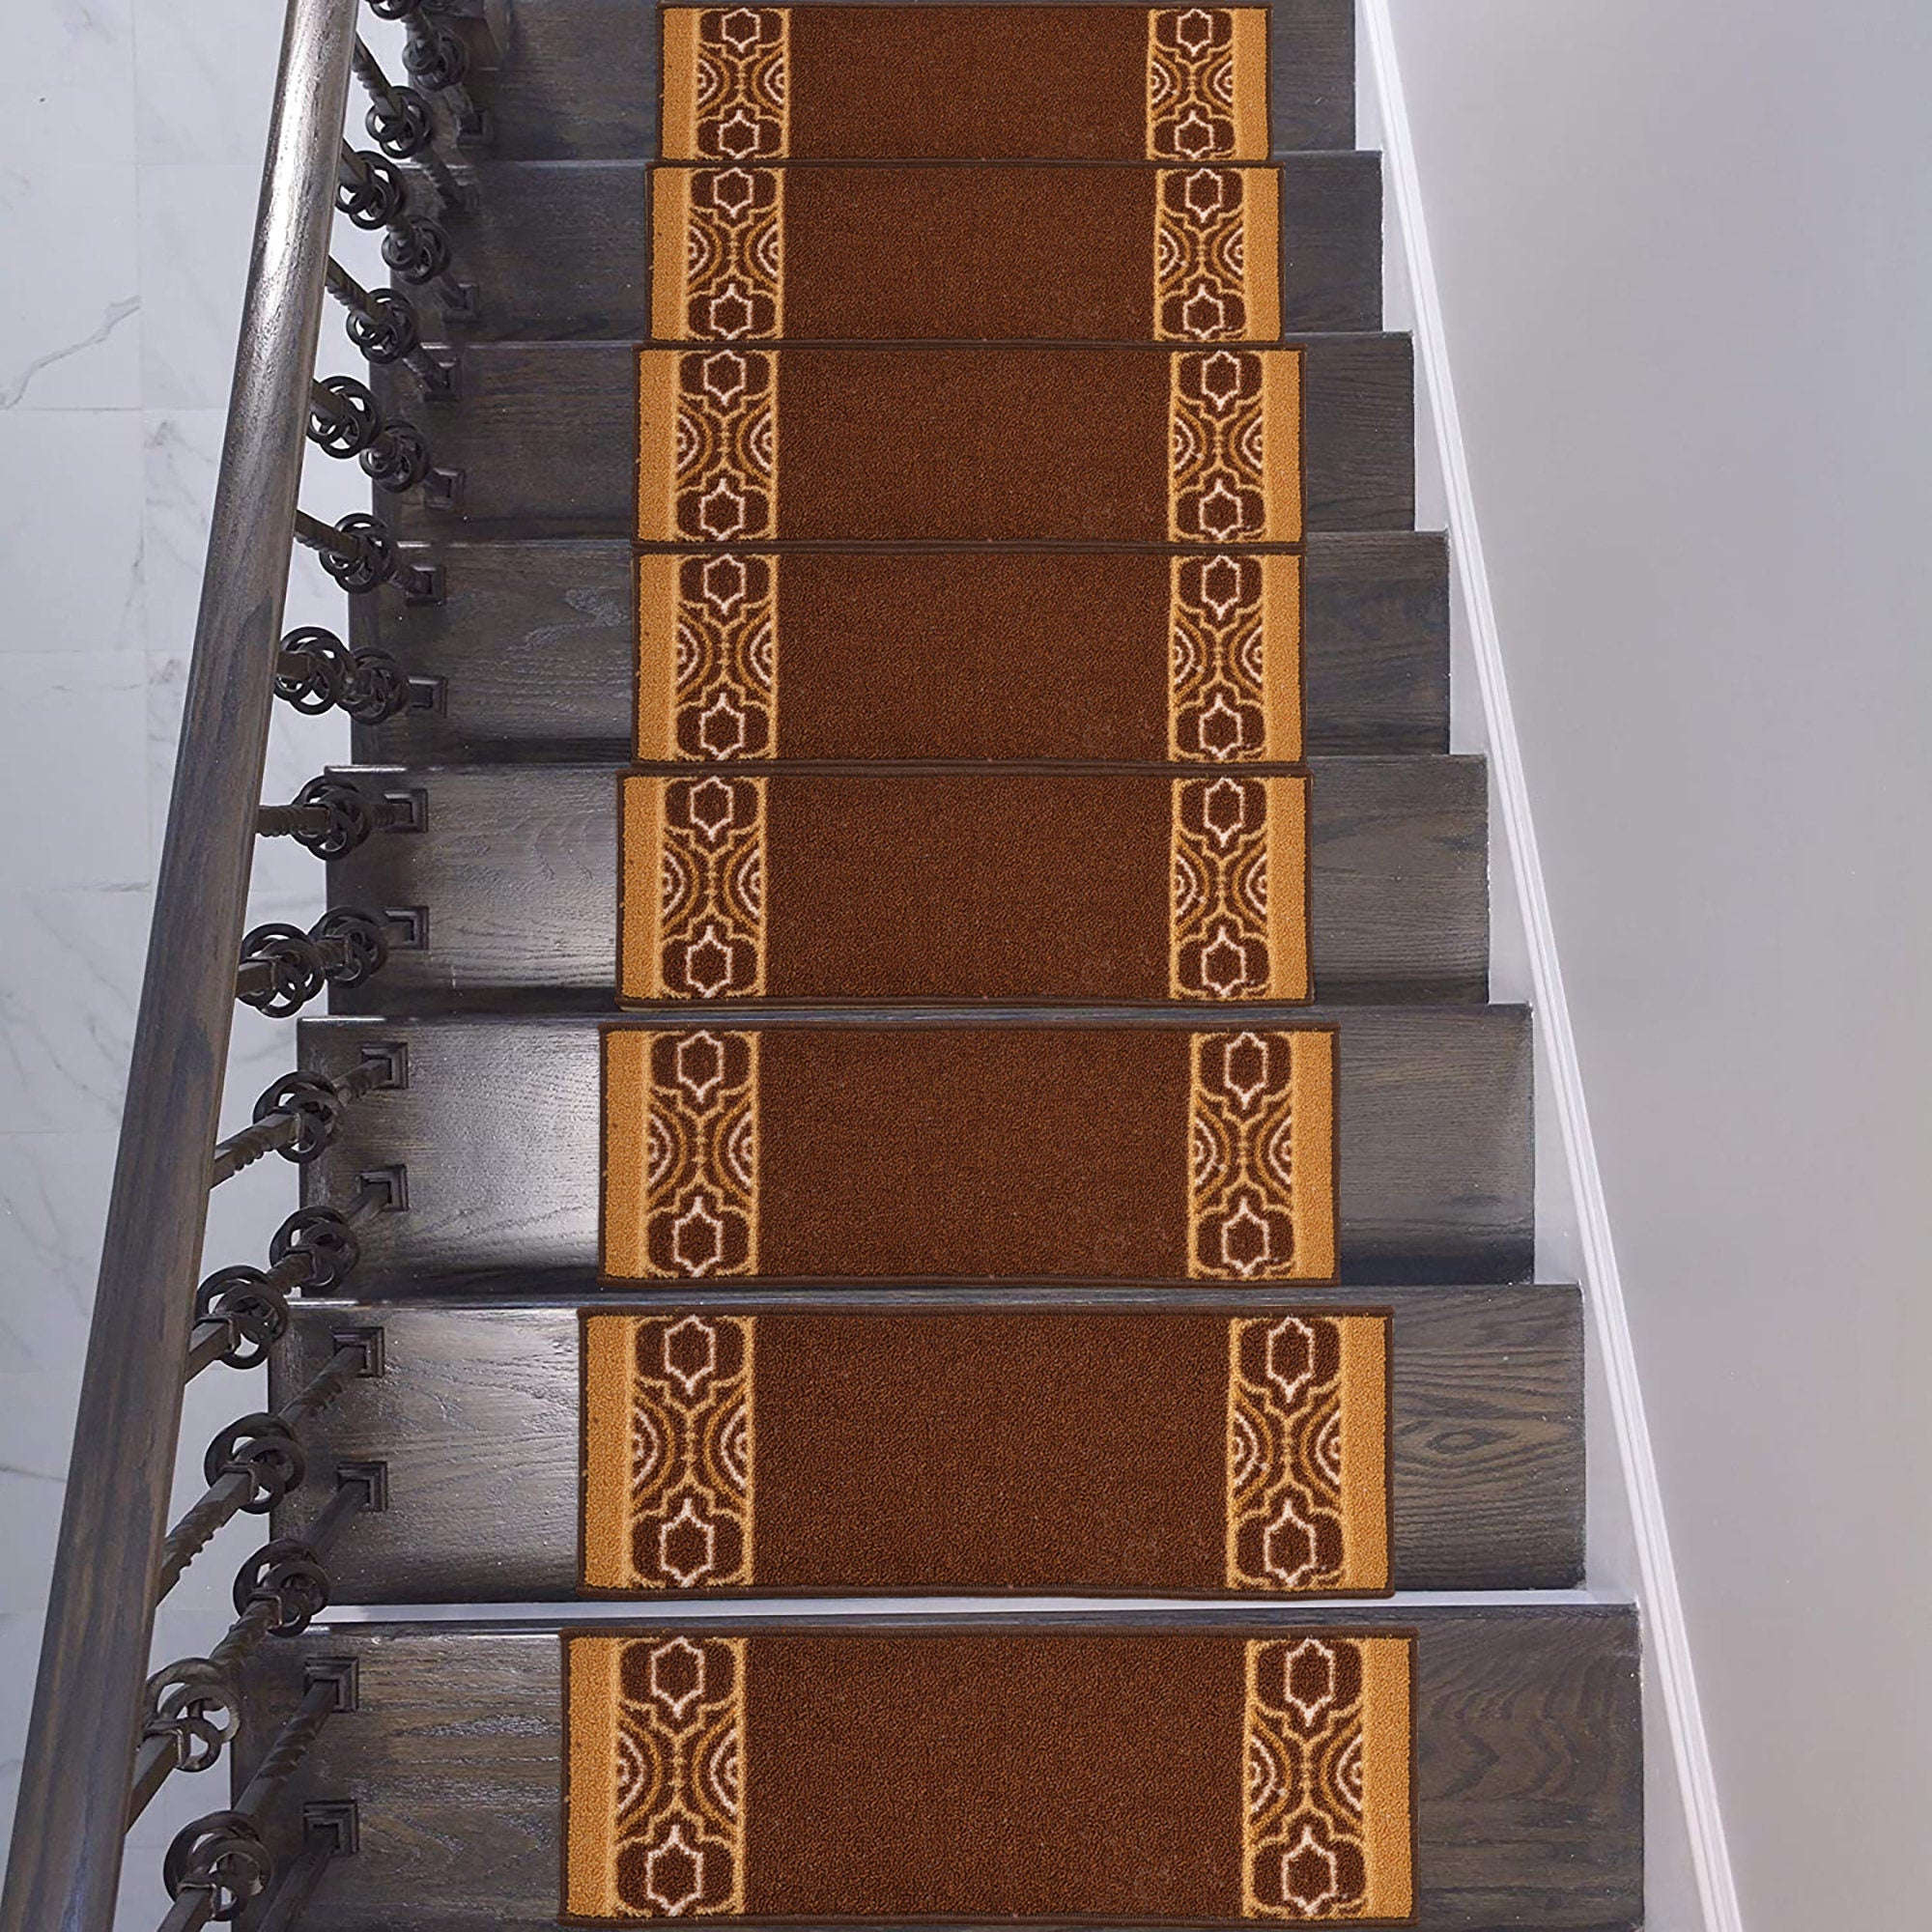 Machine Washable Stair Tread Moroccan Trellis Bordered Brown Skid Resistant Latex Back Carpet Stair Treads Size 8.5" x 26" Many Set Options-1